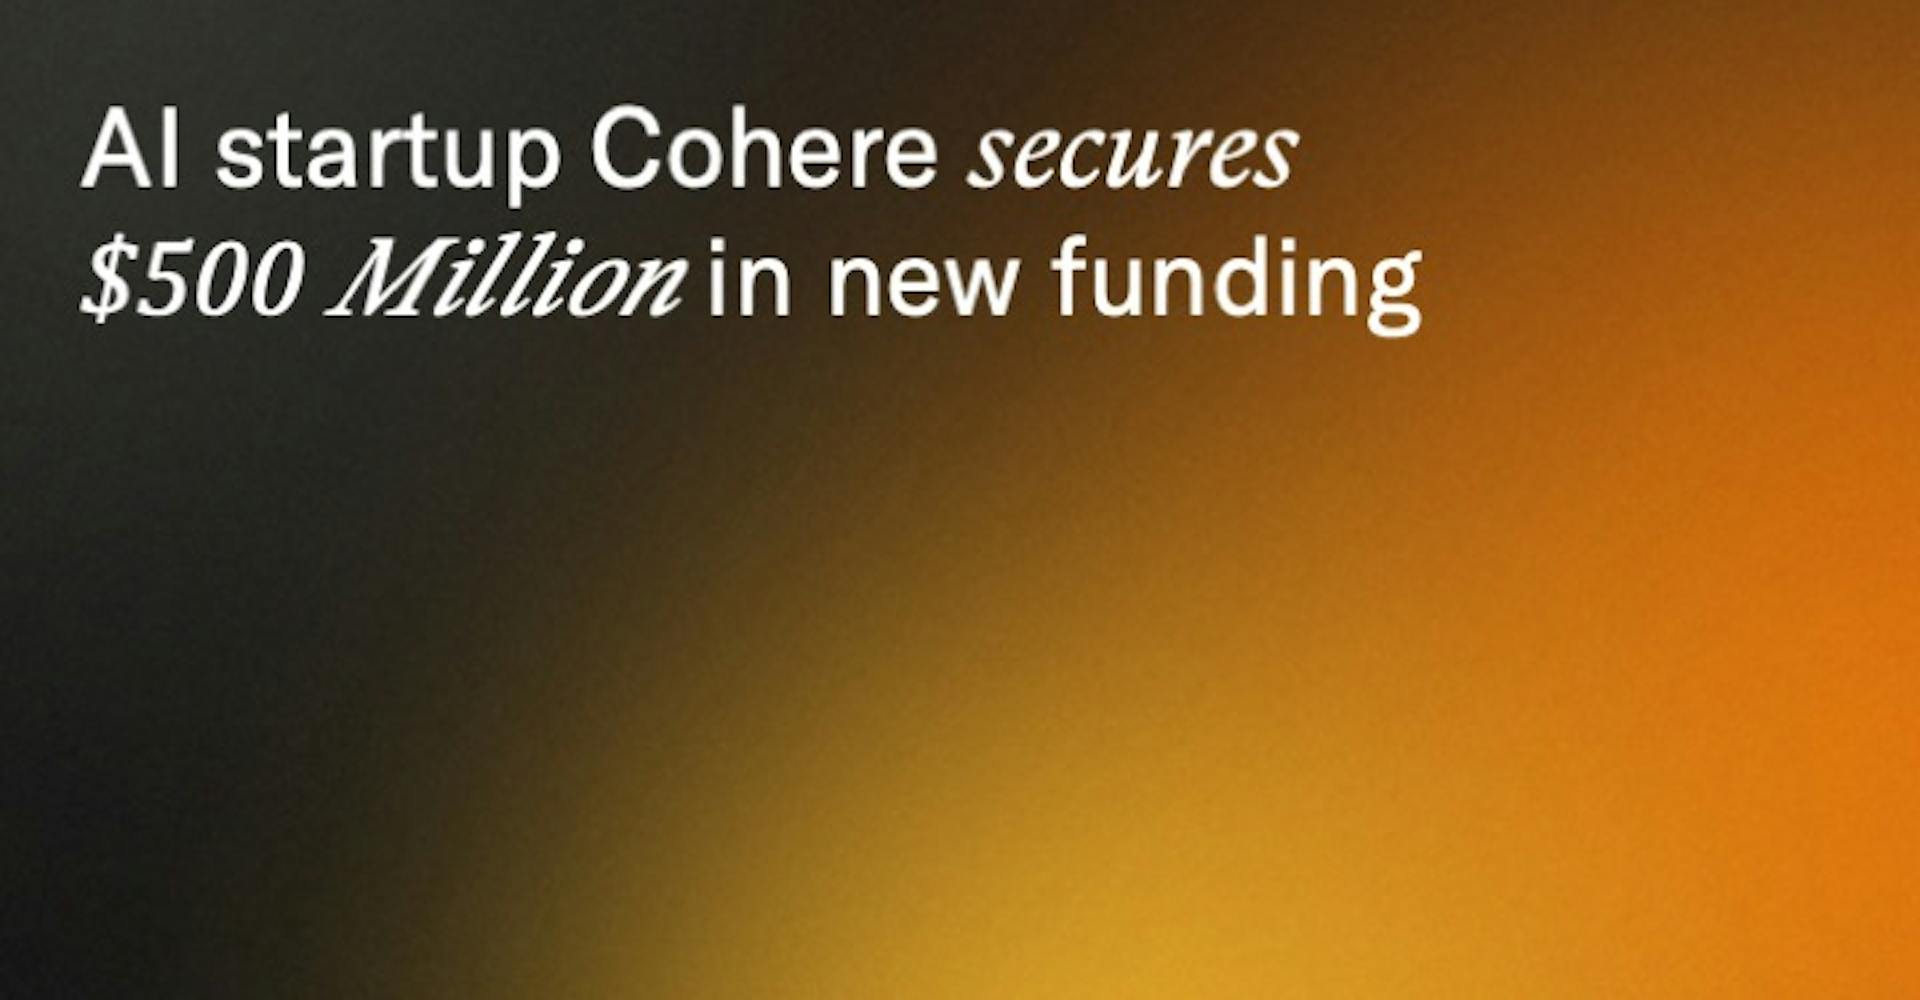 AI startup Cohere secures 500 million in new funding